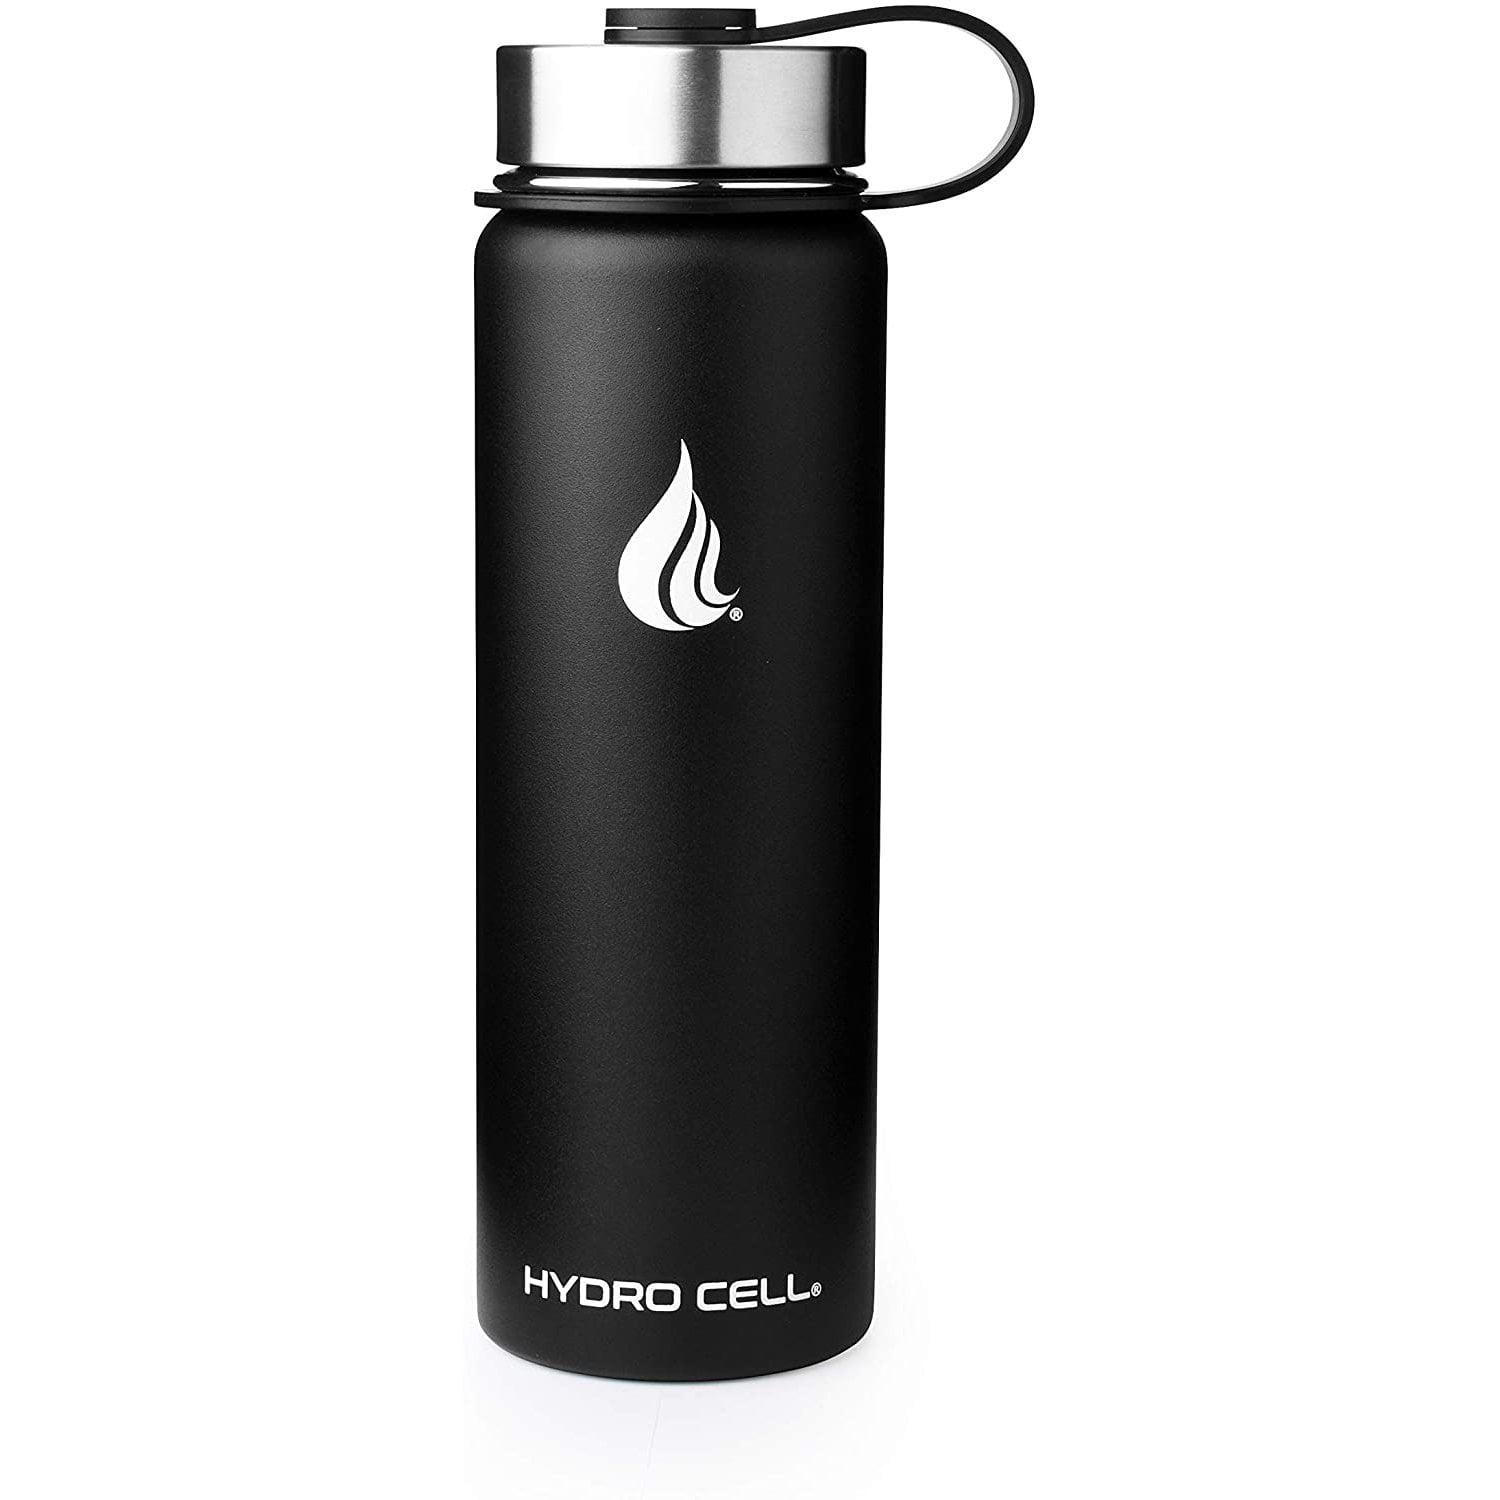 24oz (Fluid Ounces) Wide Mouth Hydro Cell Stainless Steel Water Bottle Black - image 1 of 4